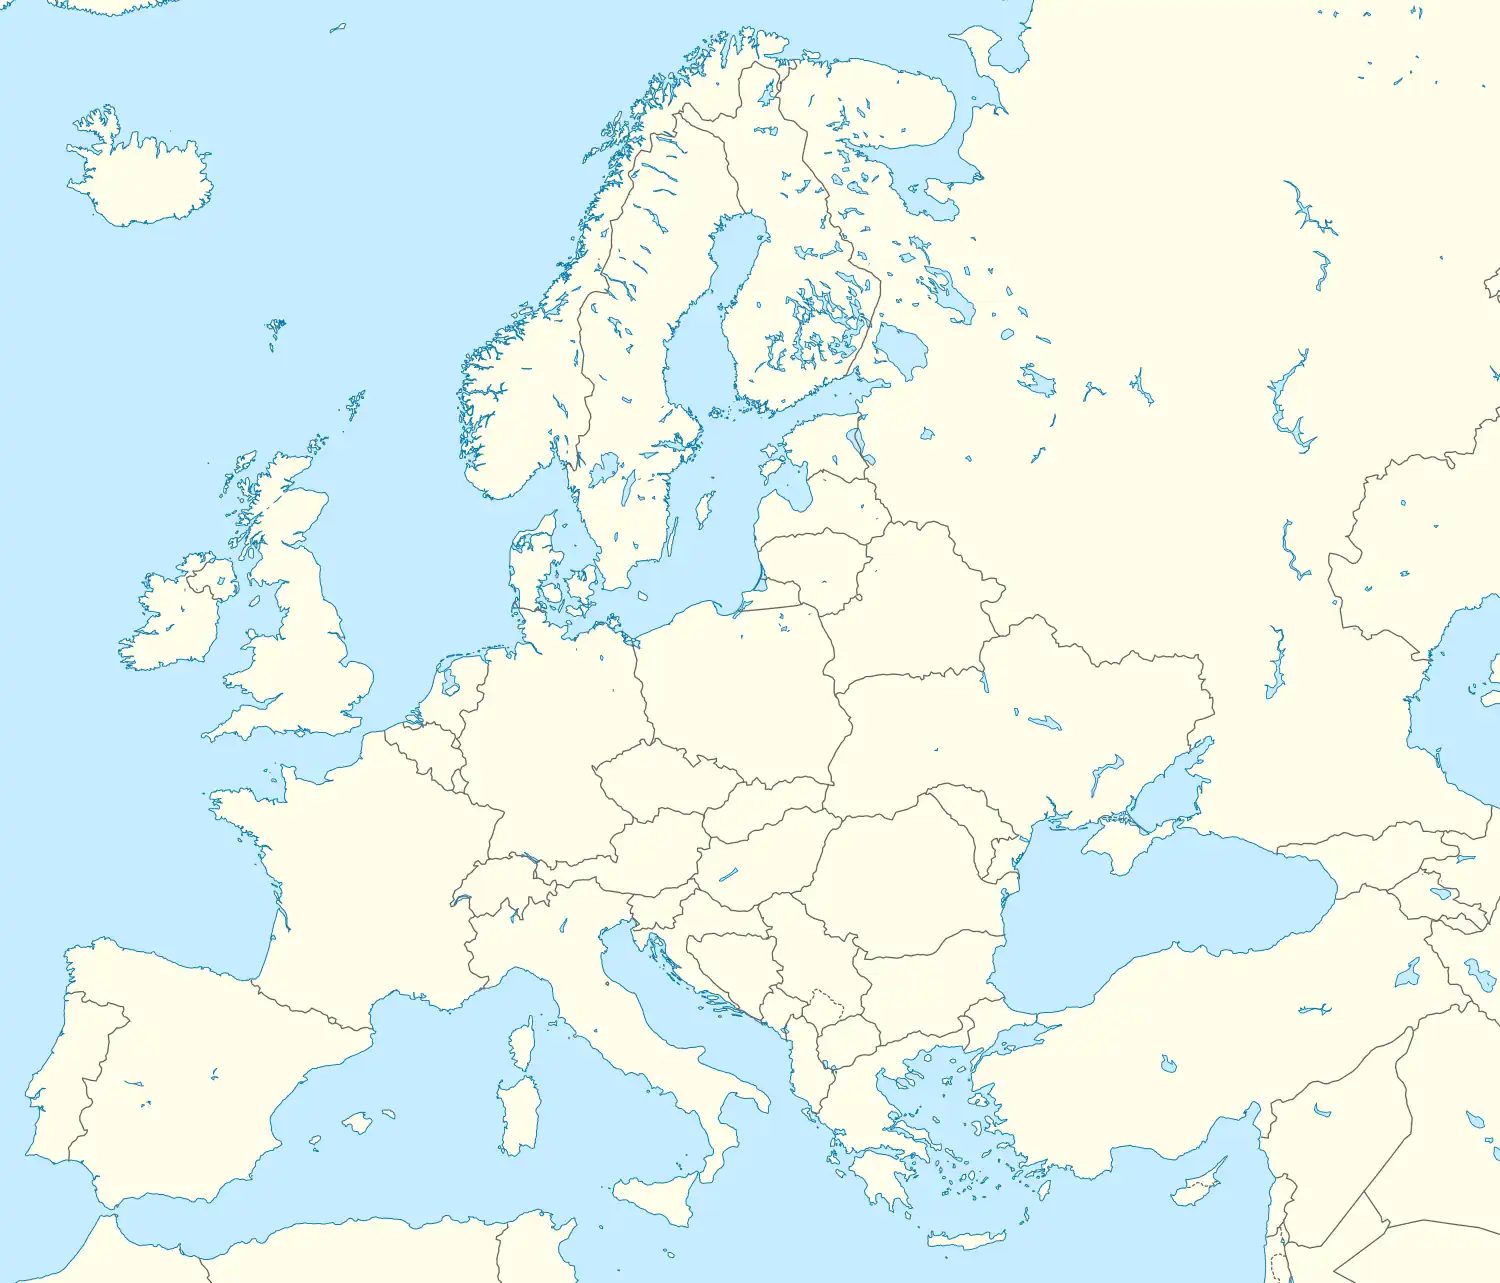 CSO is located in Europe